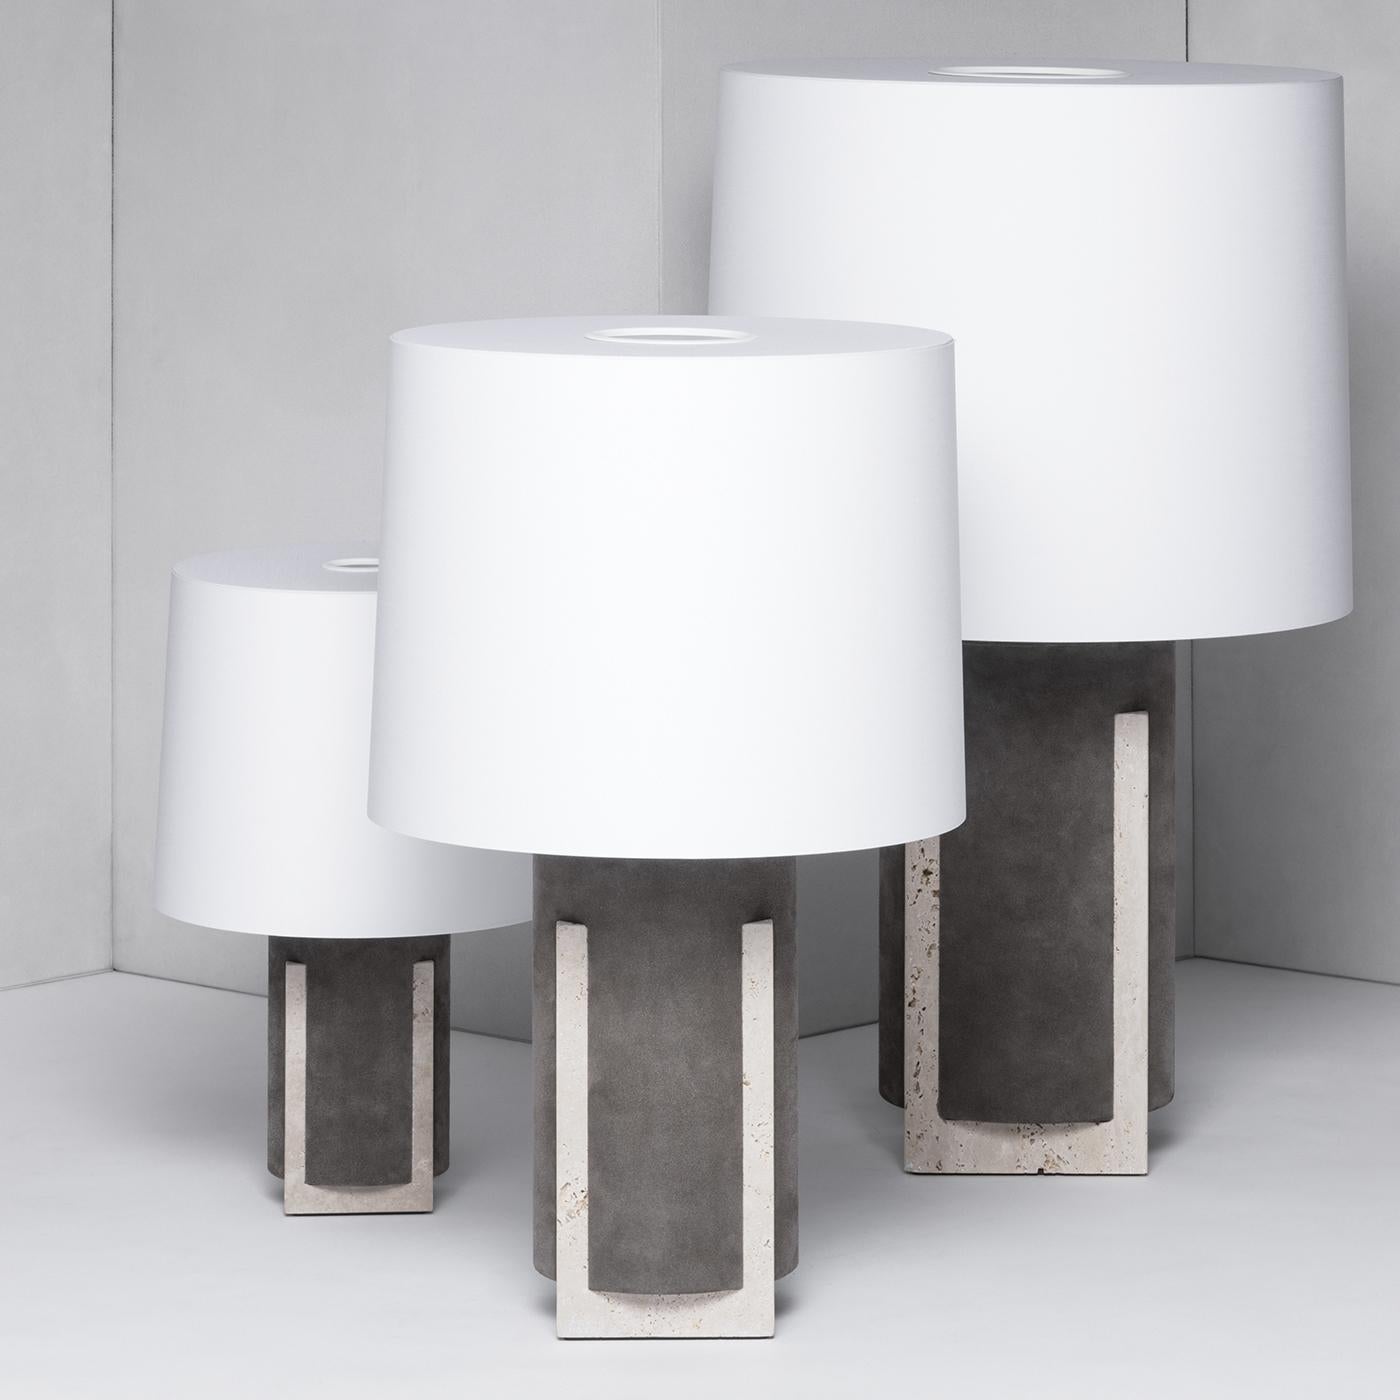 An homage to the architecture of Italian palazzos, this refined lamp embodies modern aesthetic and graphic simplicity. Crafted in brown nappa leather, the cylindrical body is supported by a cream-colored, square travertine limestone base. In a